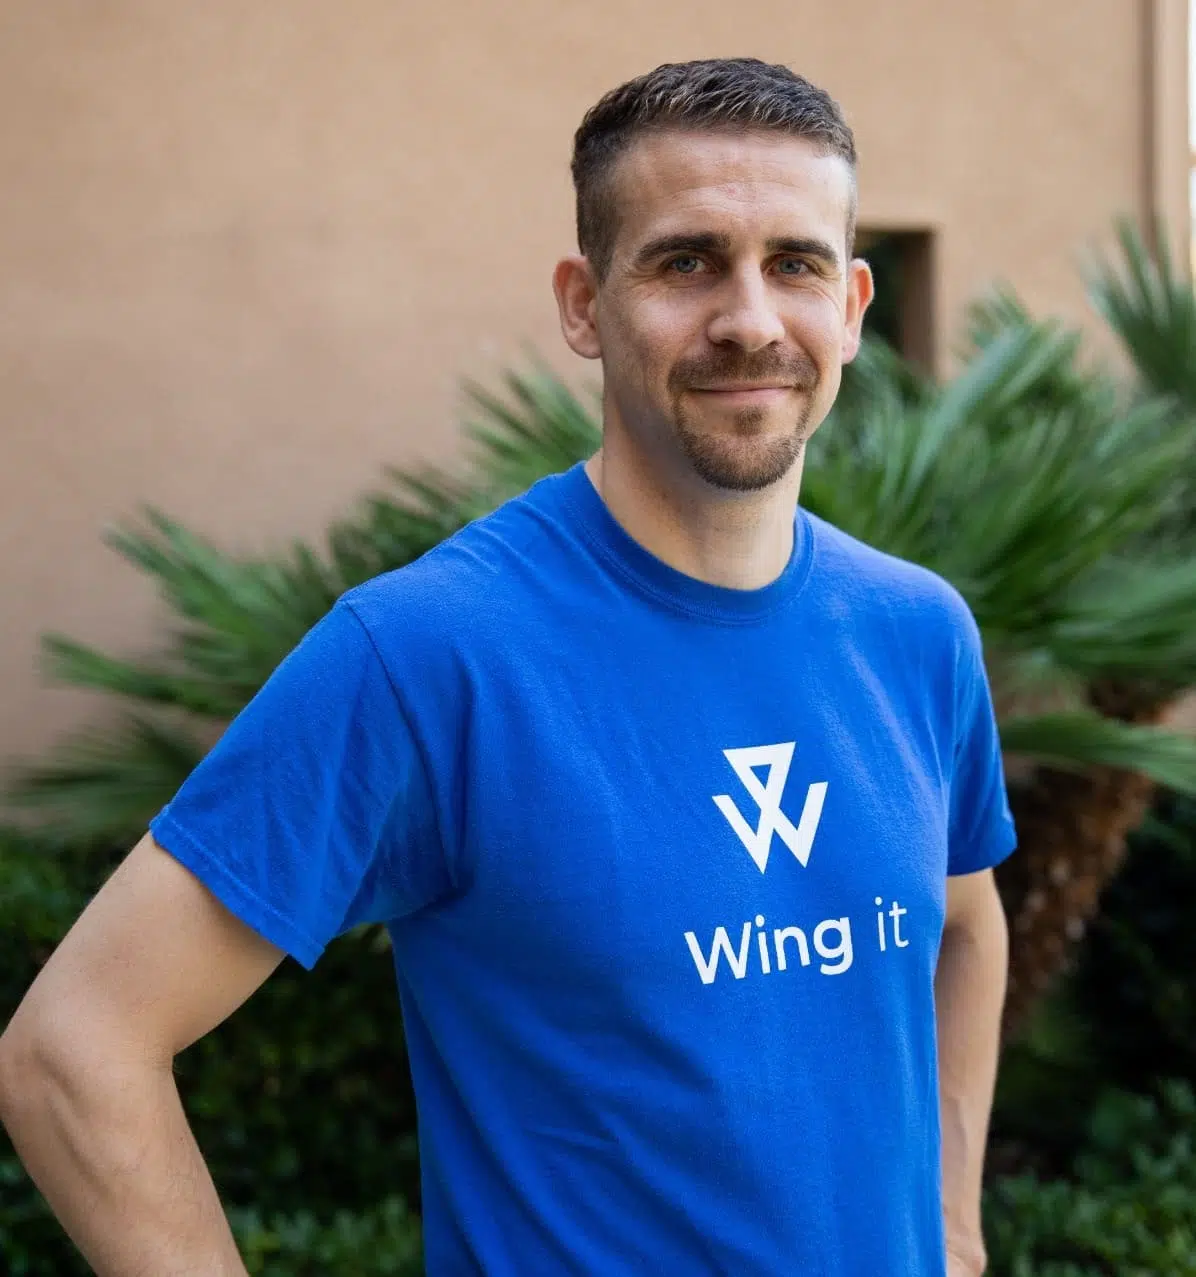 Roland Polzin, the co-founder and Chief Marketing Officer of Wing Assistant